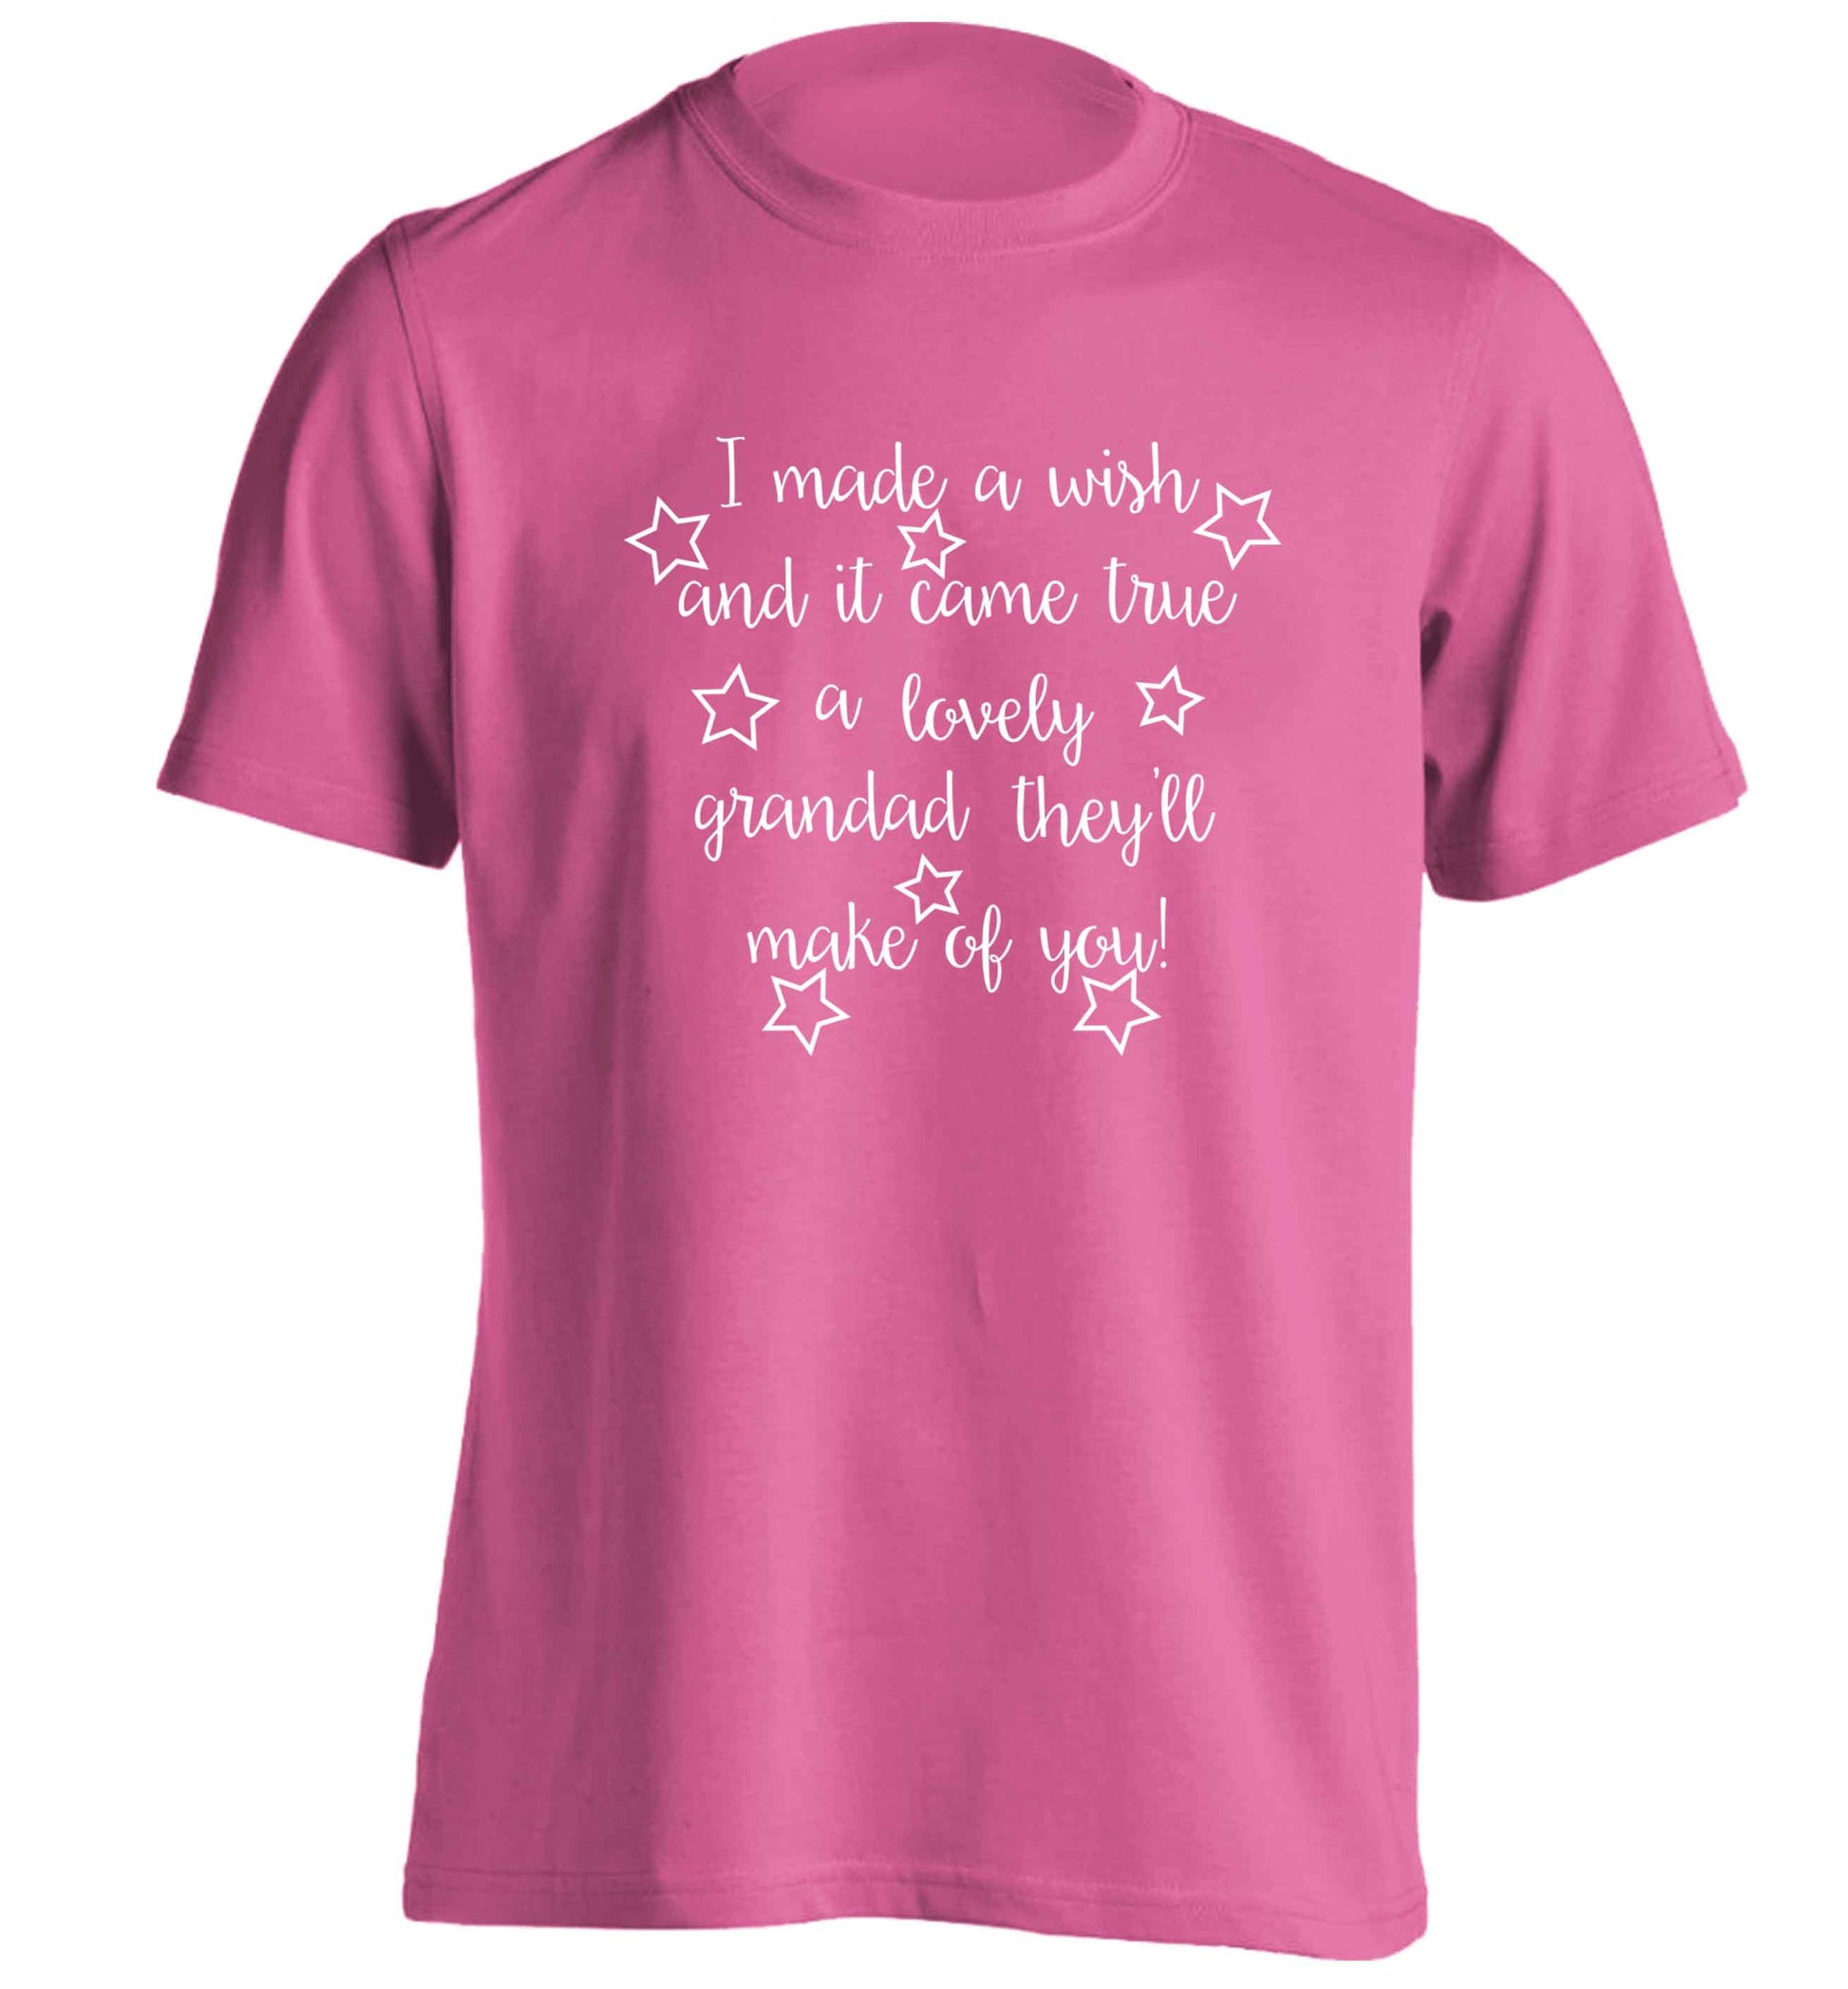 I made a wish and it came true a lovely grandad they'll make of you! adults unisex pink Tshirt 2XL